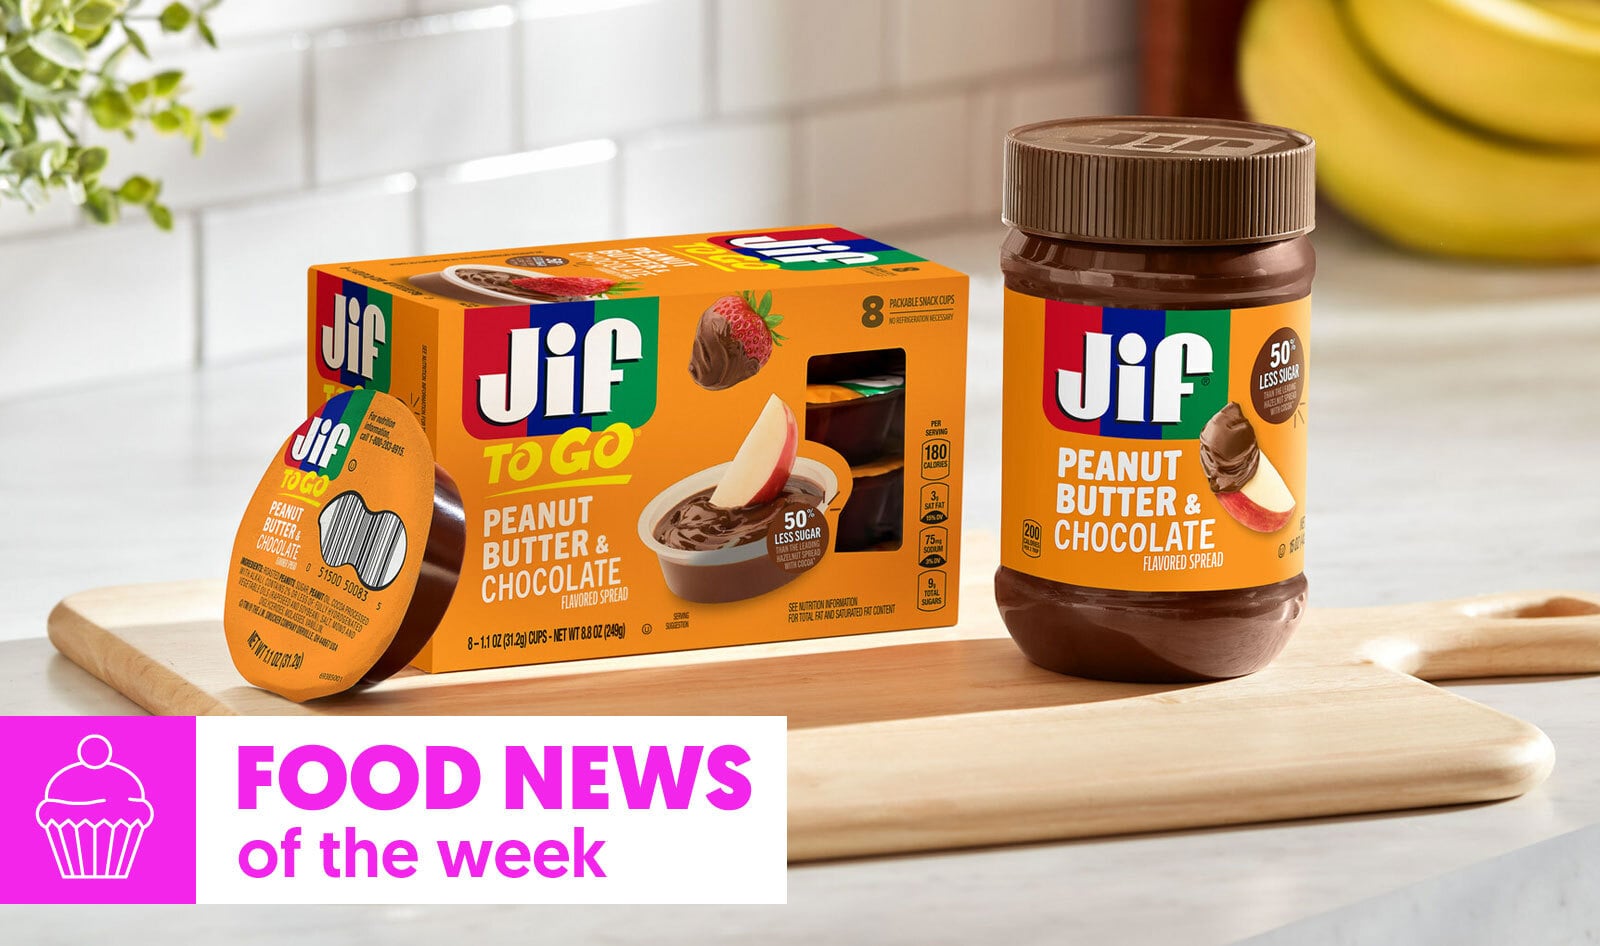 Food News of the Week: Jif Takes on Nutella, Plus Fudge Cake and Cinnamon Buns for Mom